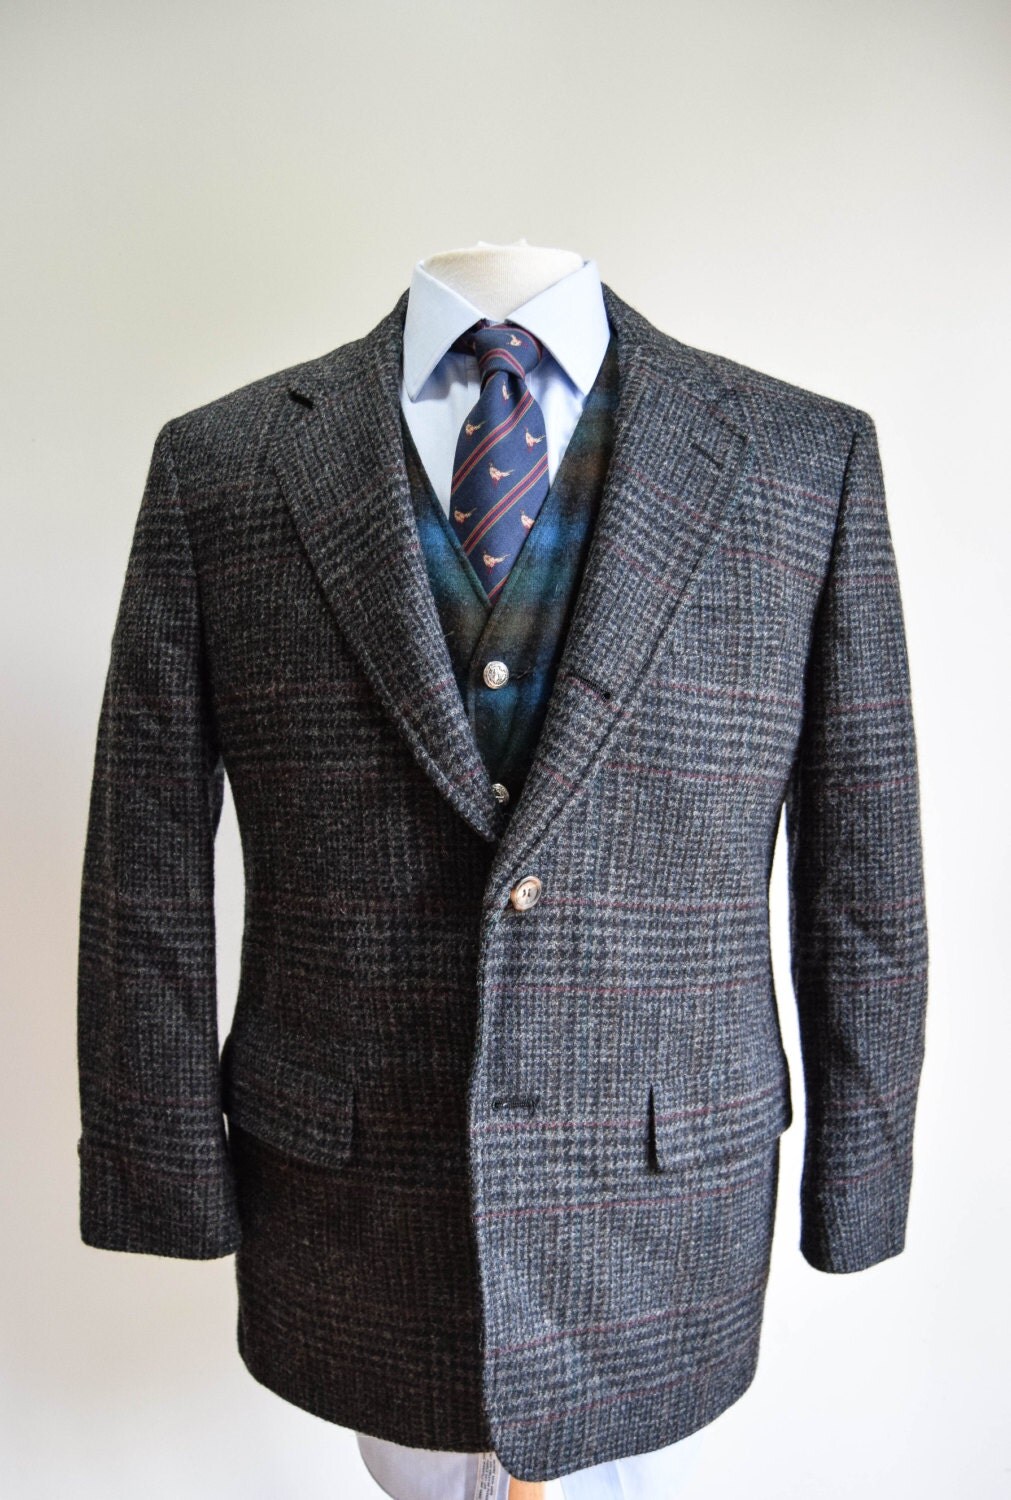 VTG Black and Gray Tweed Sport Coat by Brooks Brother by cuffNroll